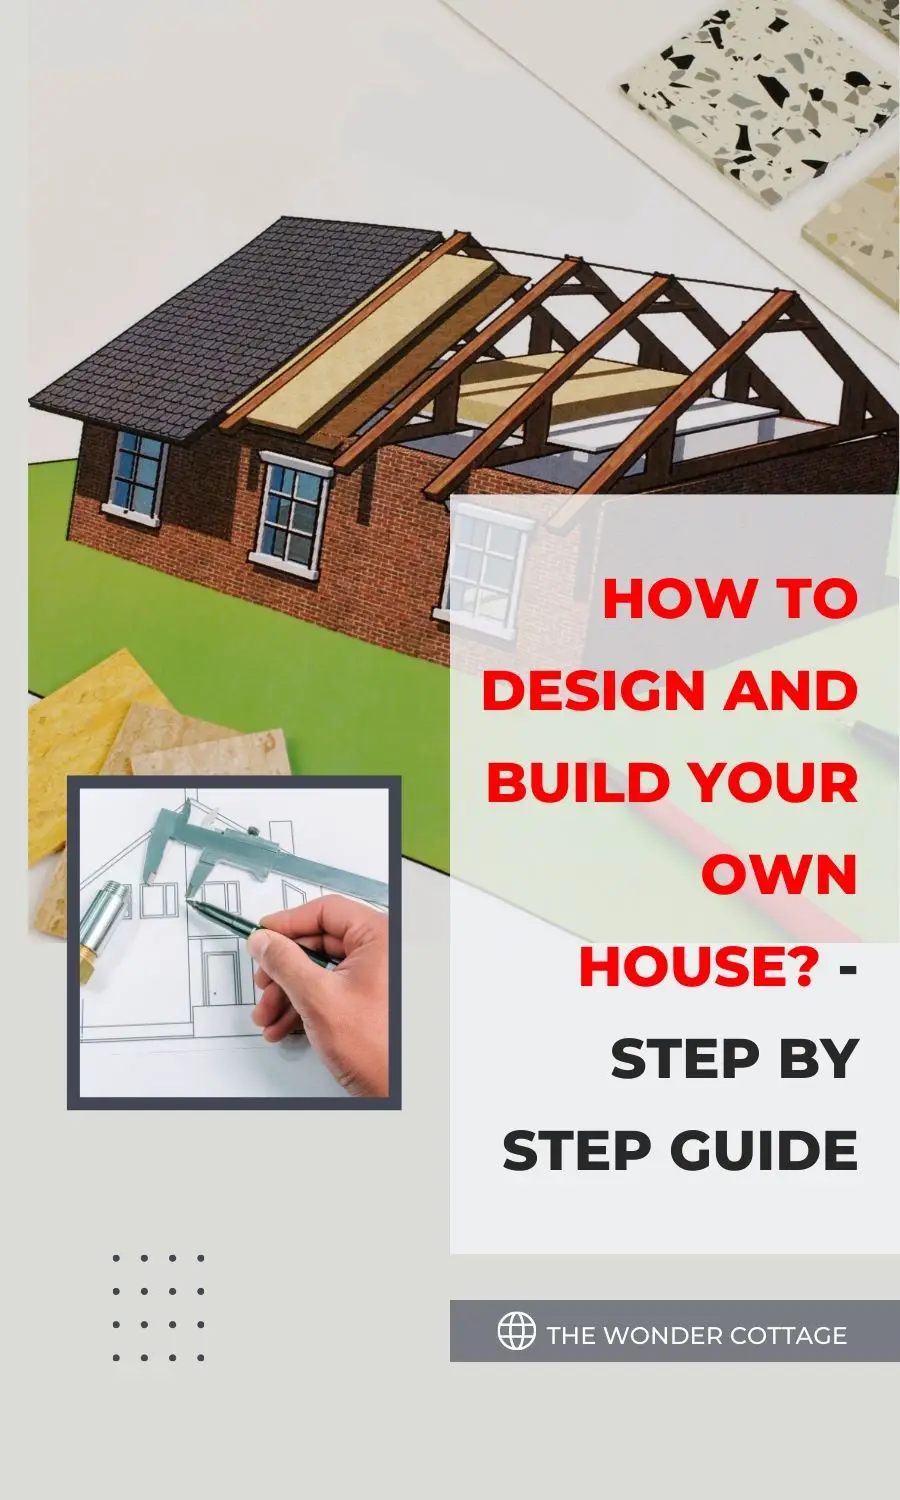 How To Design And Build Your Own House? - Step By Step Guide